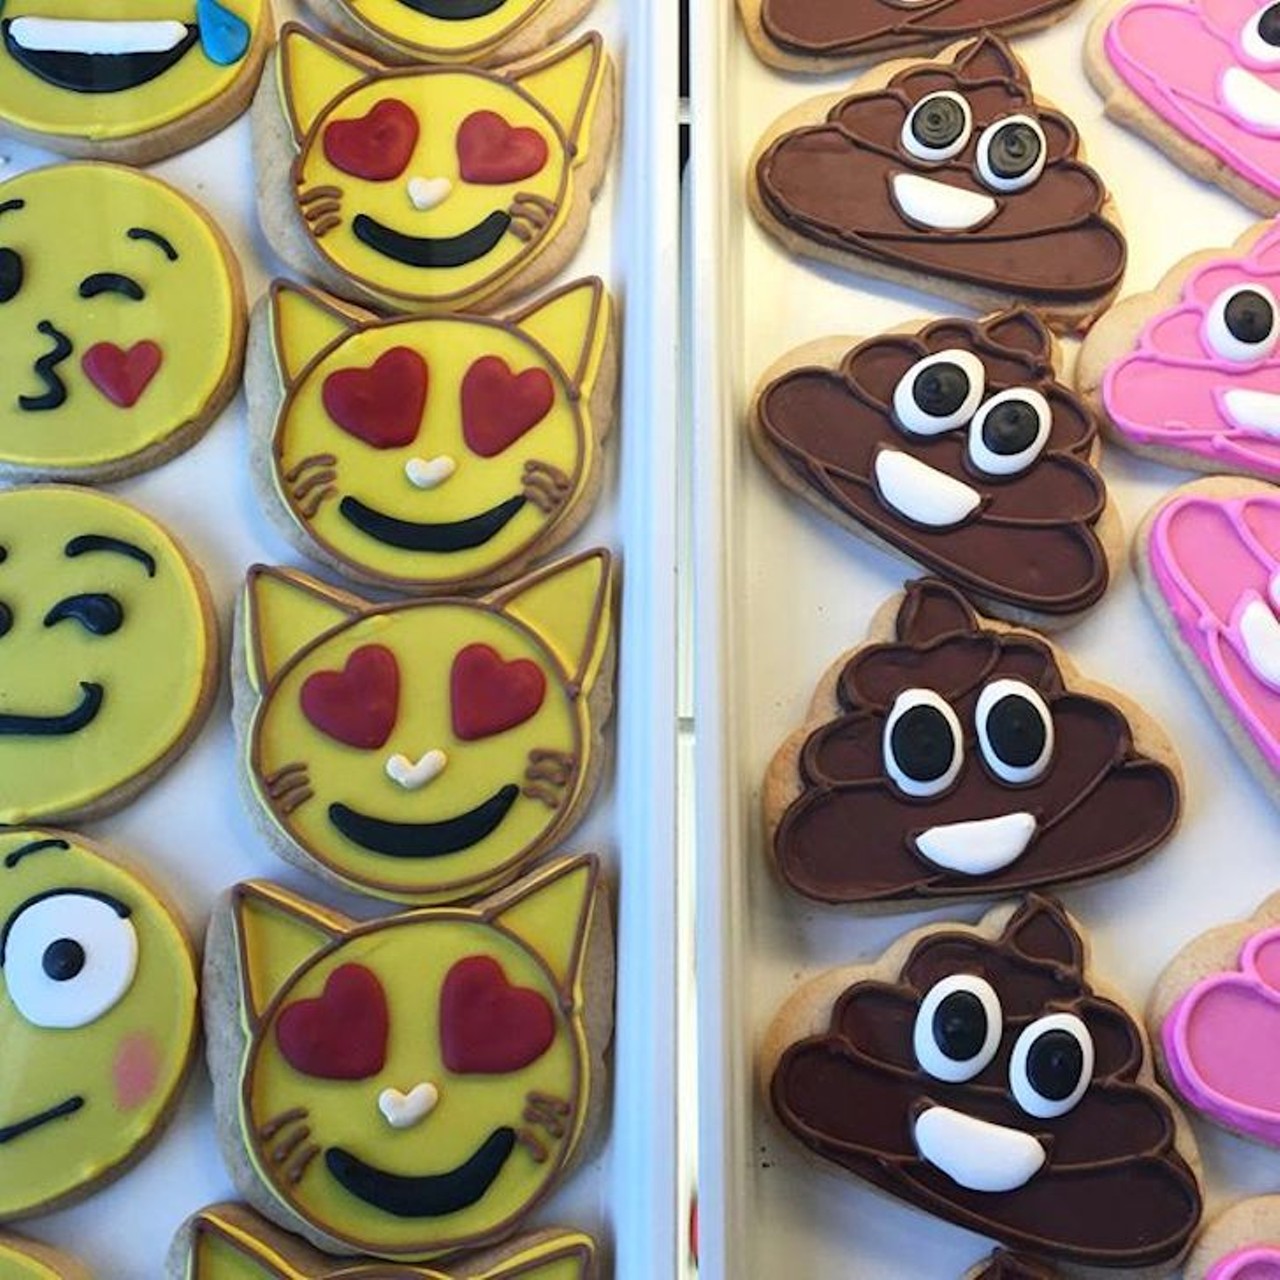 Lily's Cookies
2716 McCullough Ave., (210) 832-0886, lilyscookies.com
Hand-painted cookies with creative designs are superstars over at Lily's Cookies, a tiny bakery in the historical Monte Vista area. Cruise by this stop for a coffee and a couple of treats for you and your sweet. 
Photo via Instagram (twentysomethingsa)